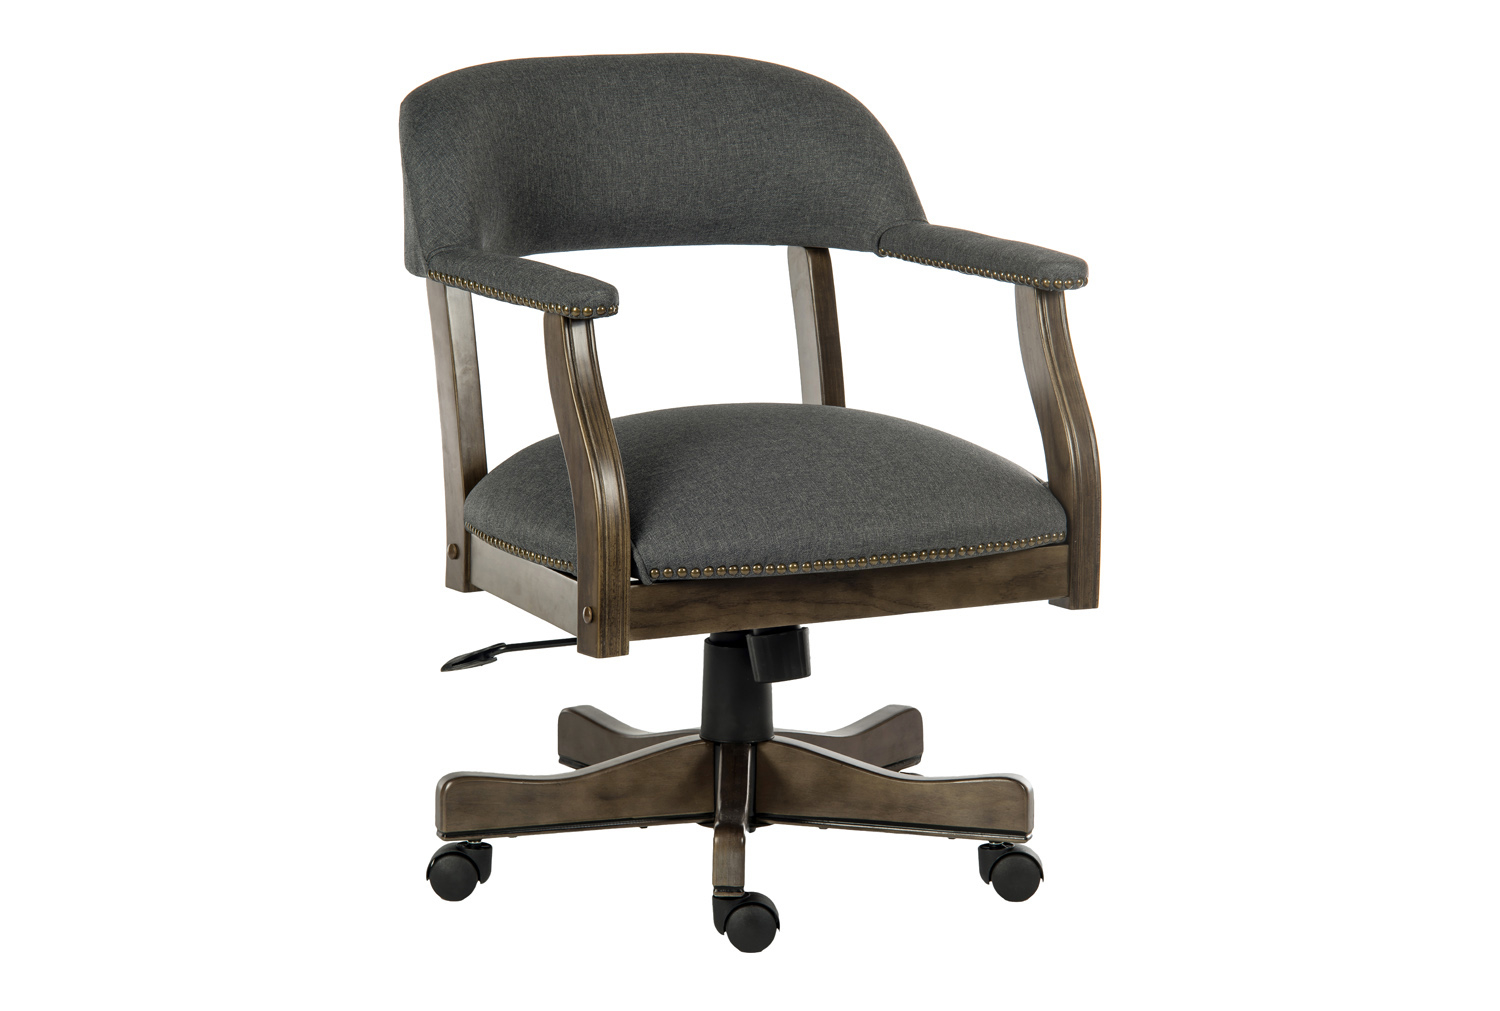 Banyan Fabric Executive Office Chair, Express Delivery